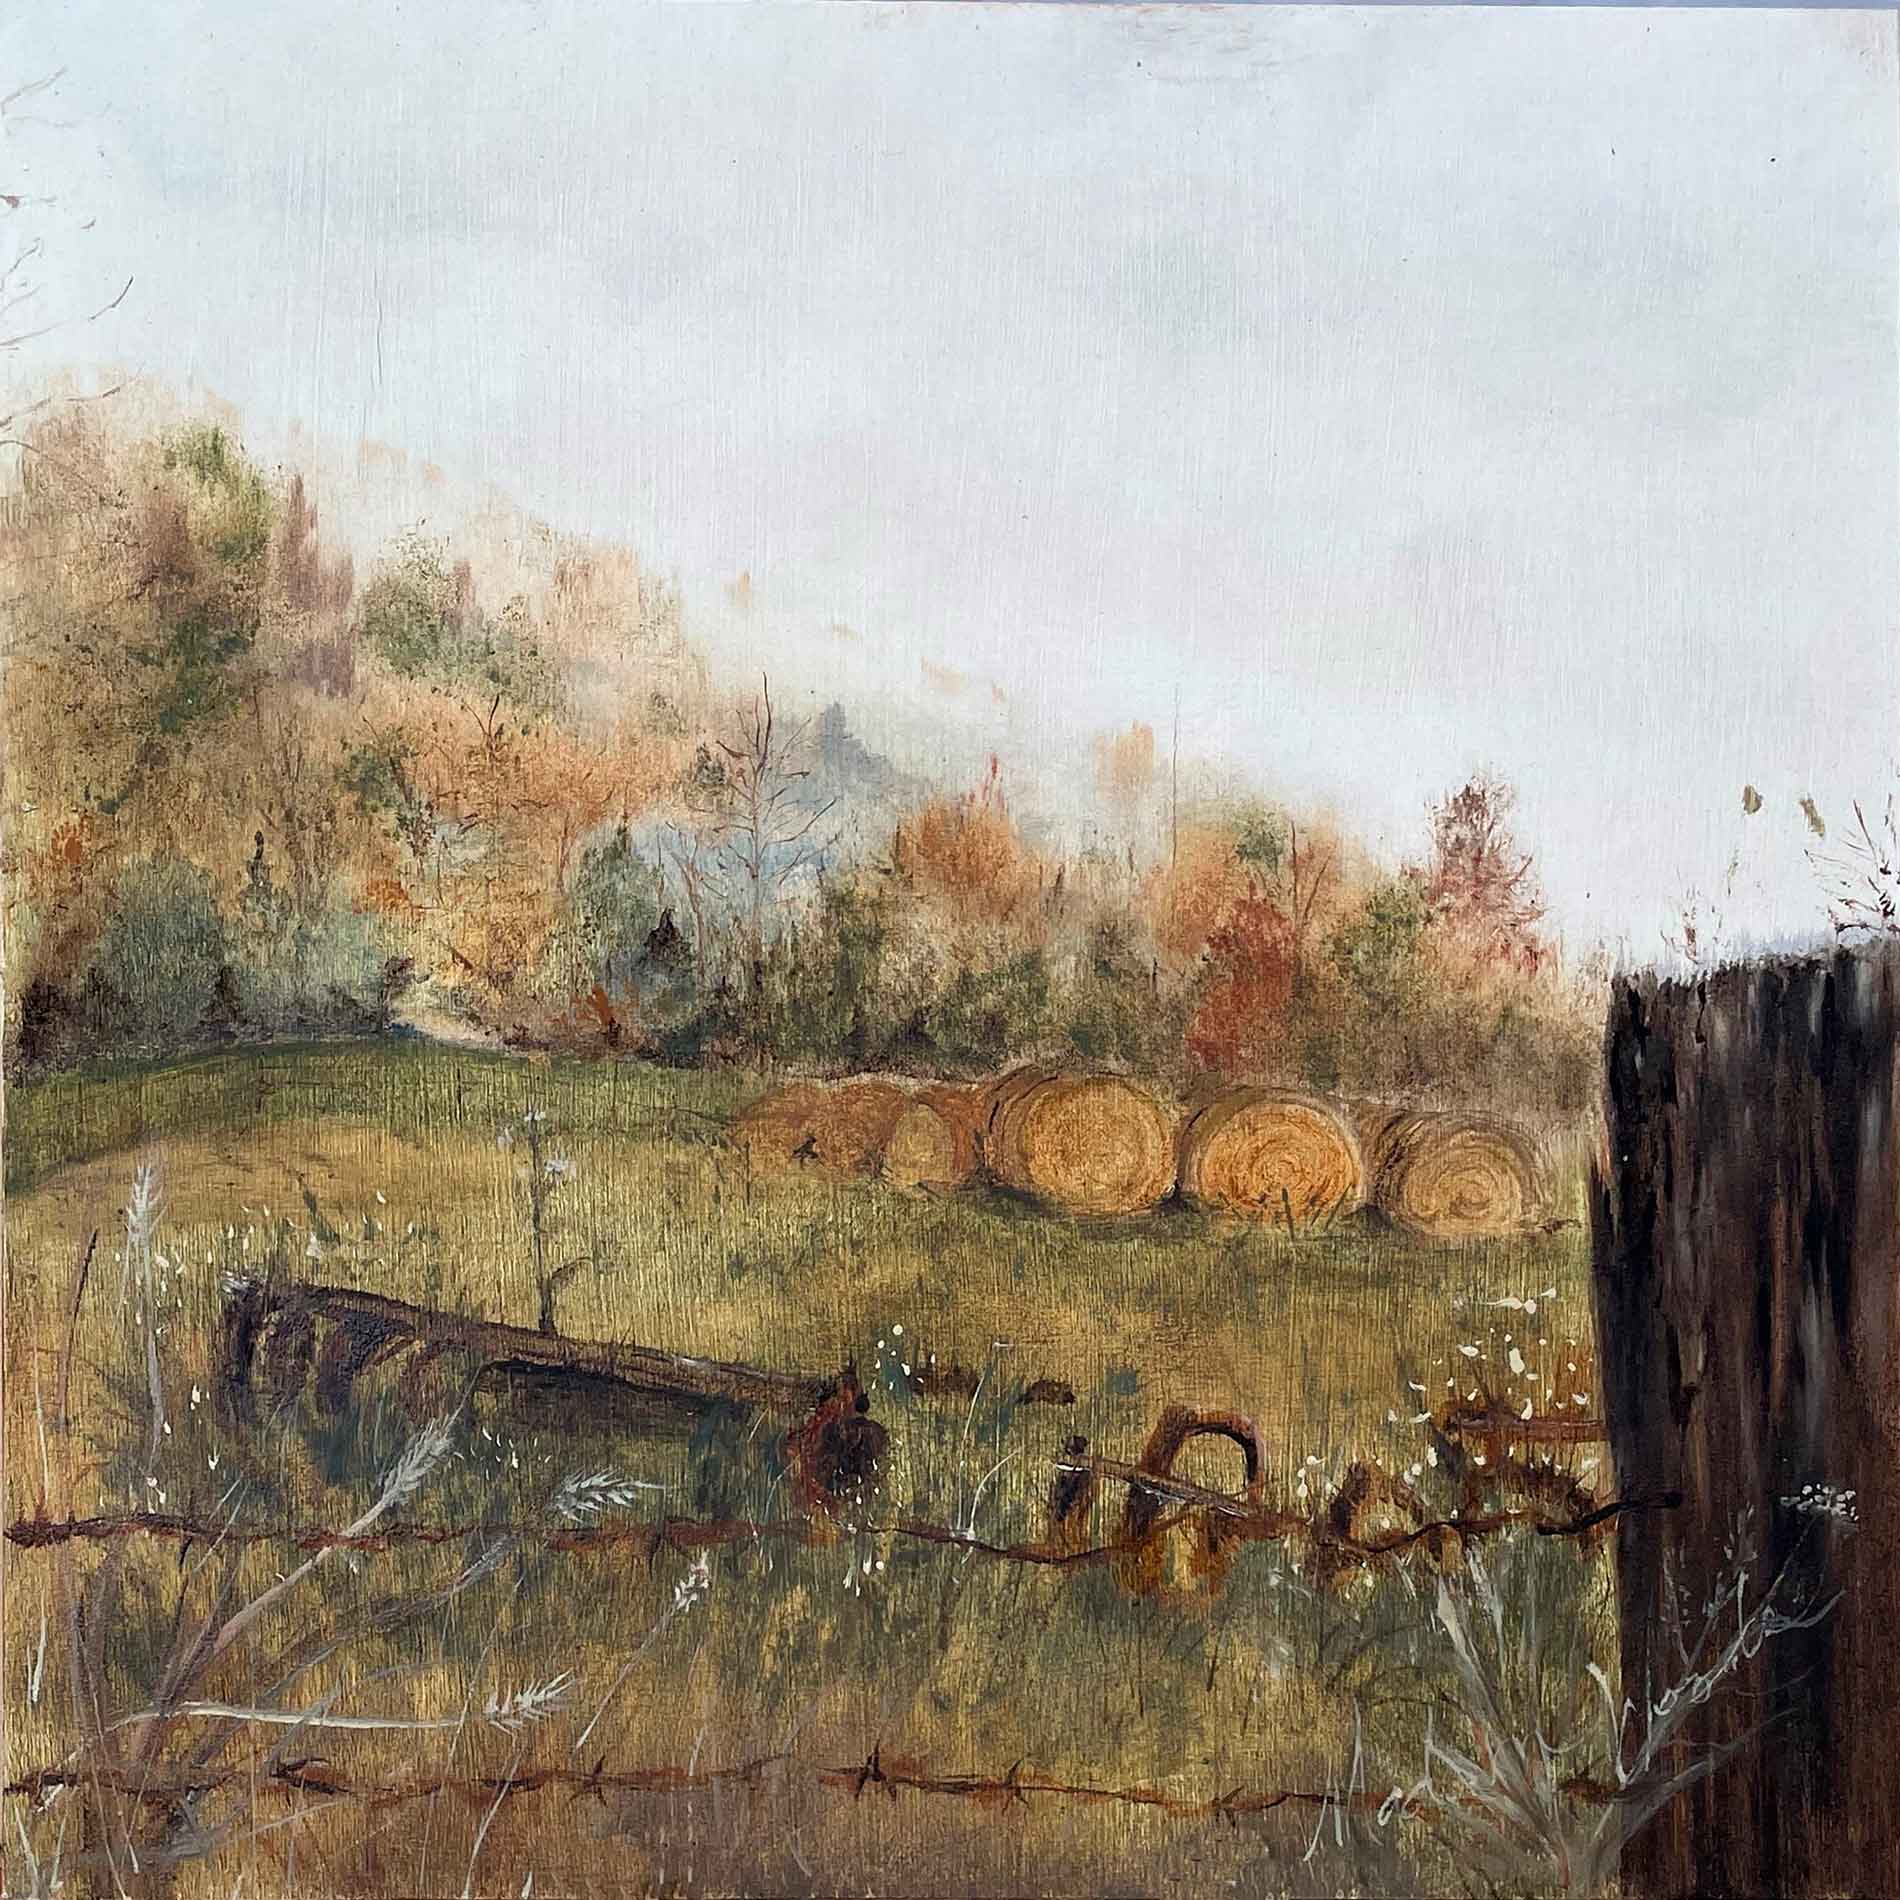 A painting of an Ozark autumn morning.